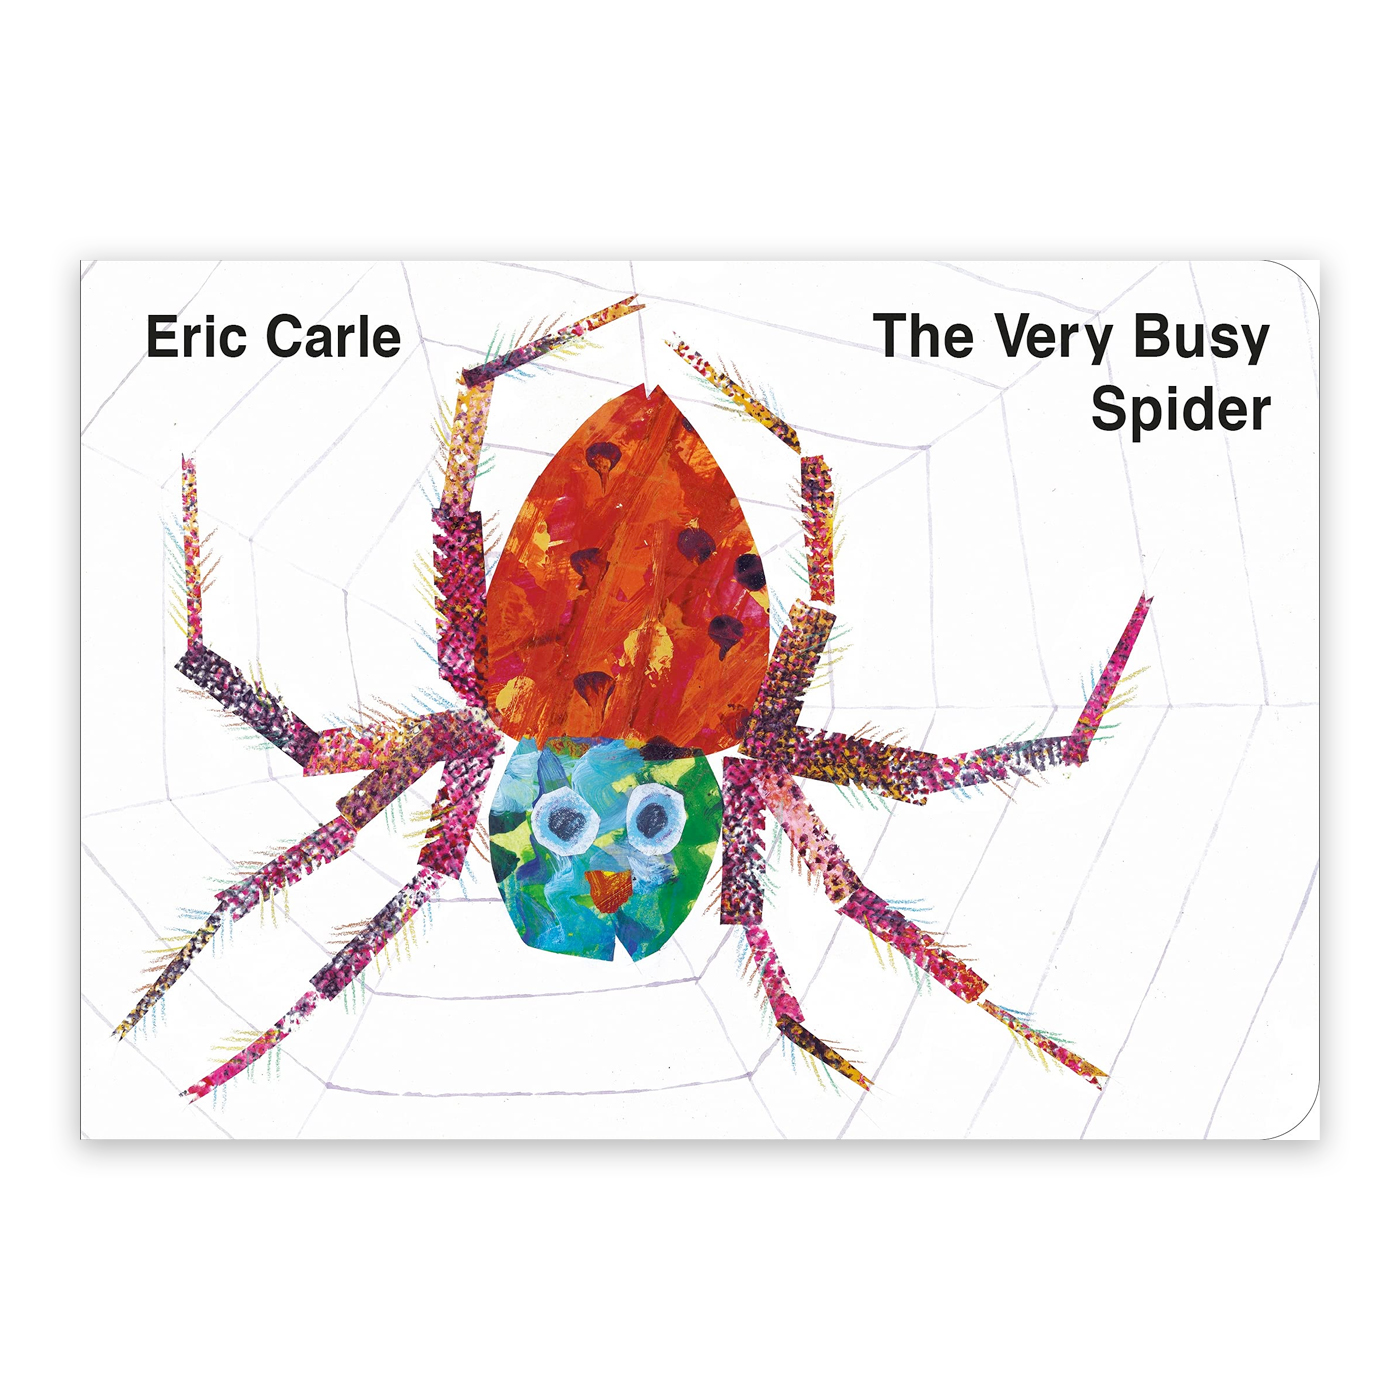  The Very Busy Spider